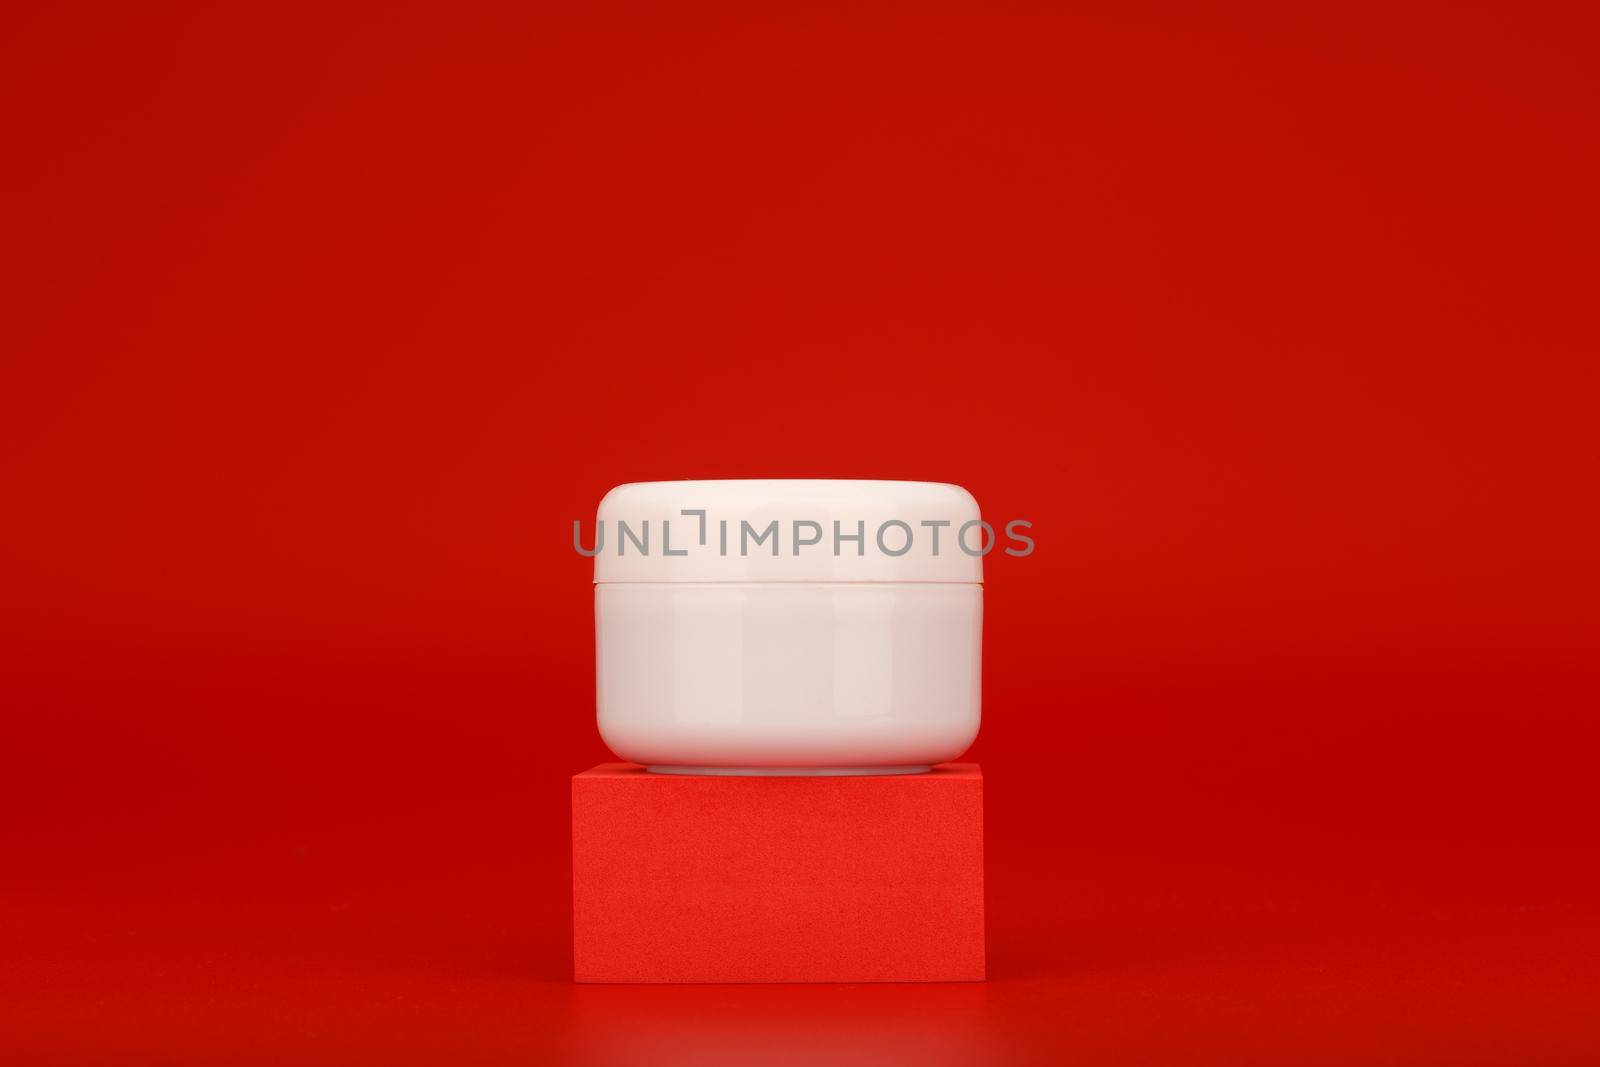 White cosmetic jar with cream, mask or scrub on red podium against red background with copy space. Concept of beauty routine and skin care or hair care